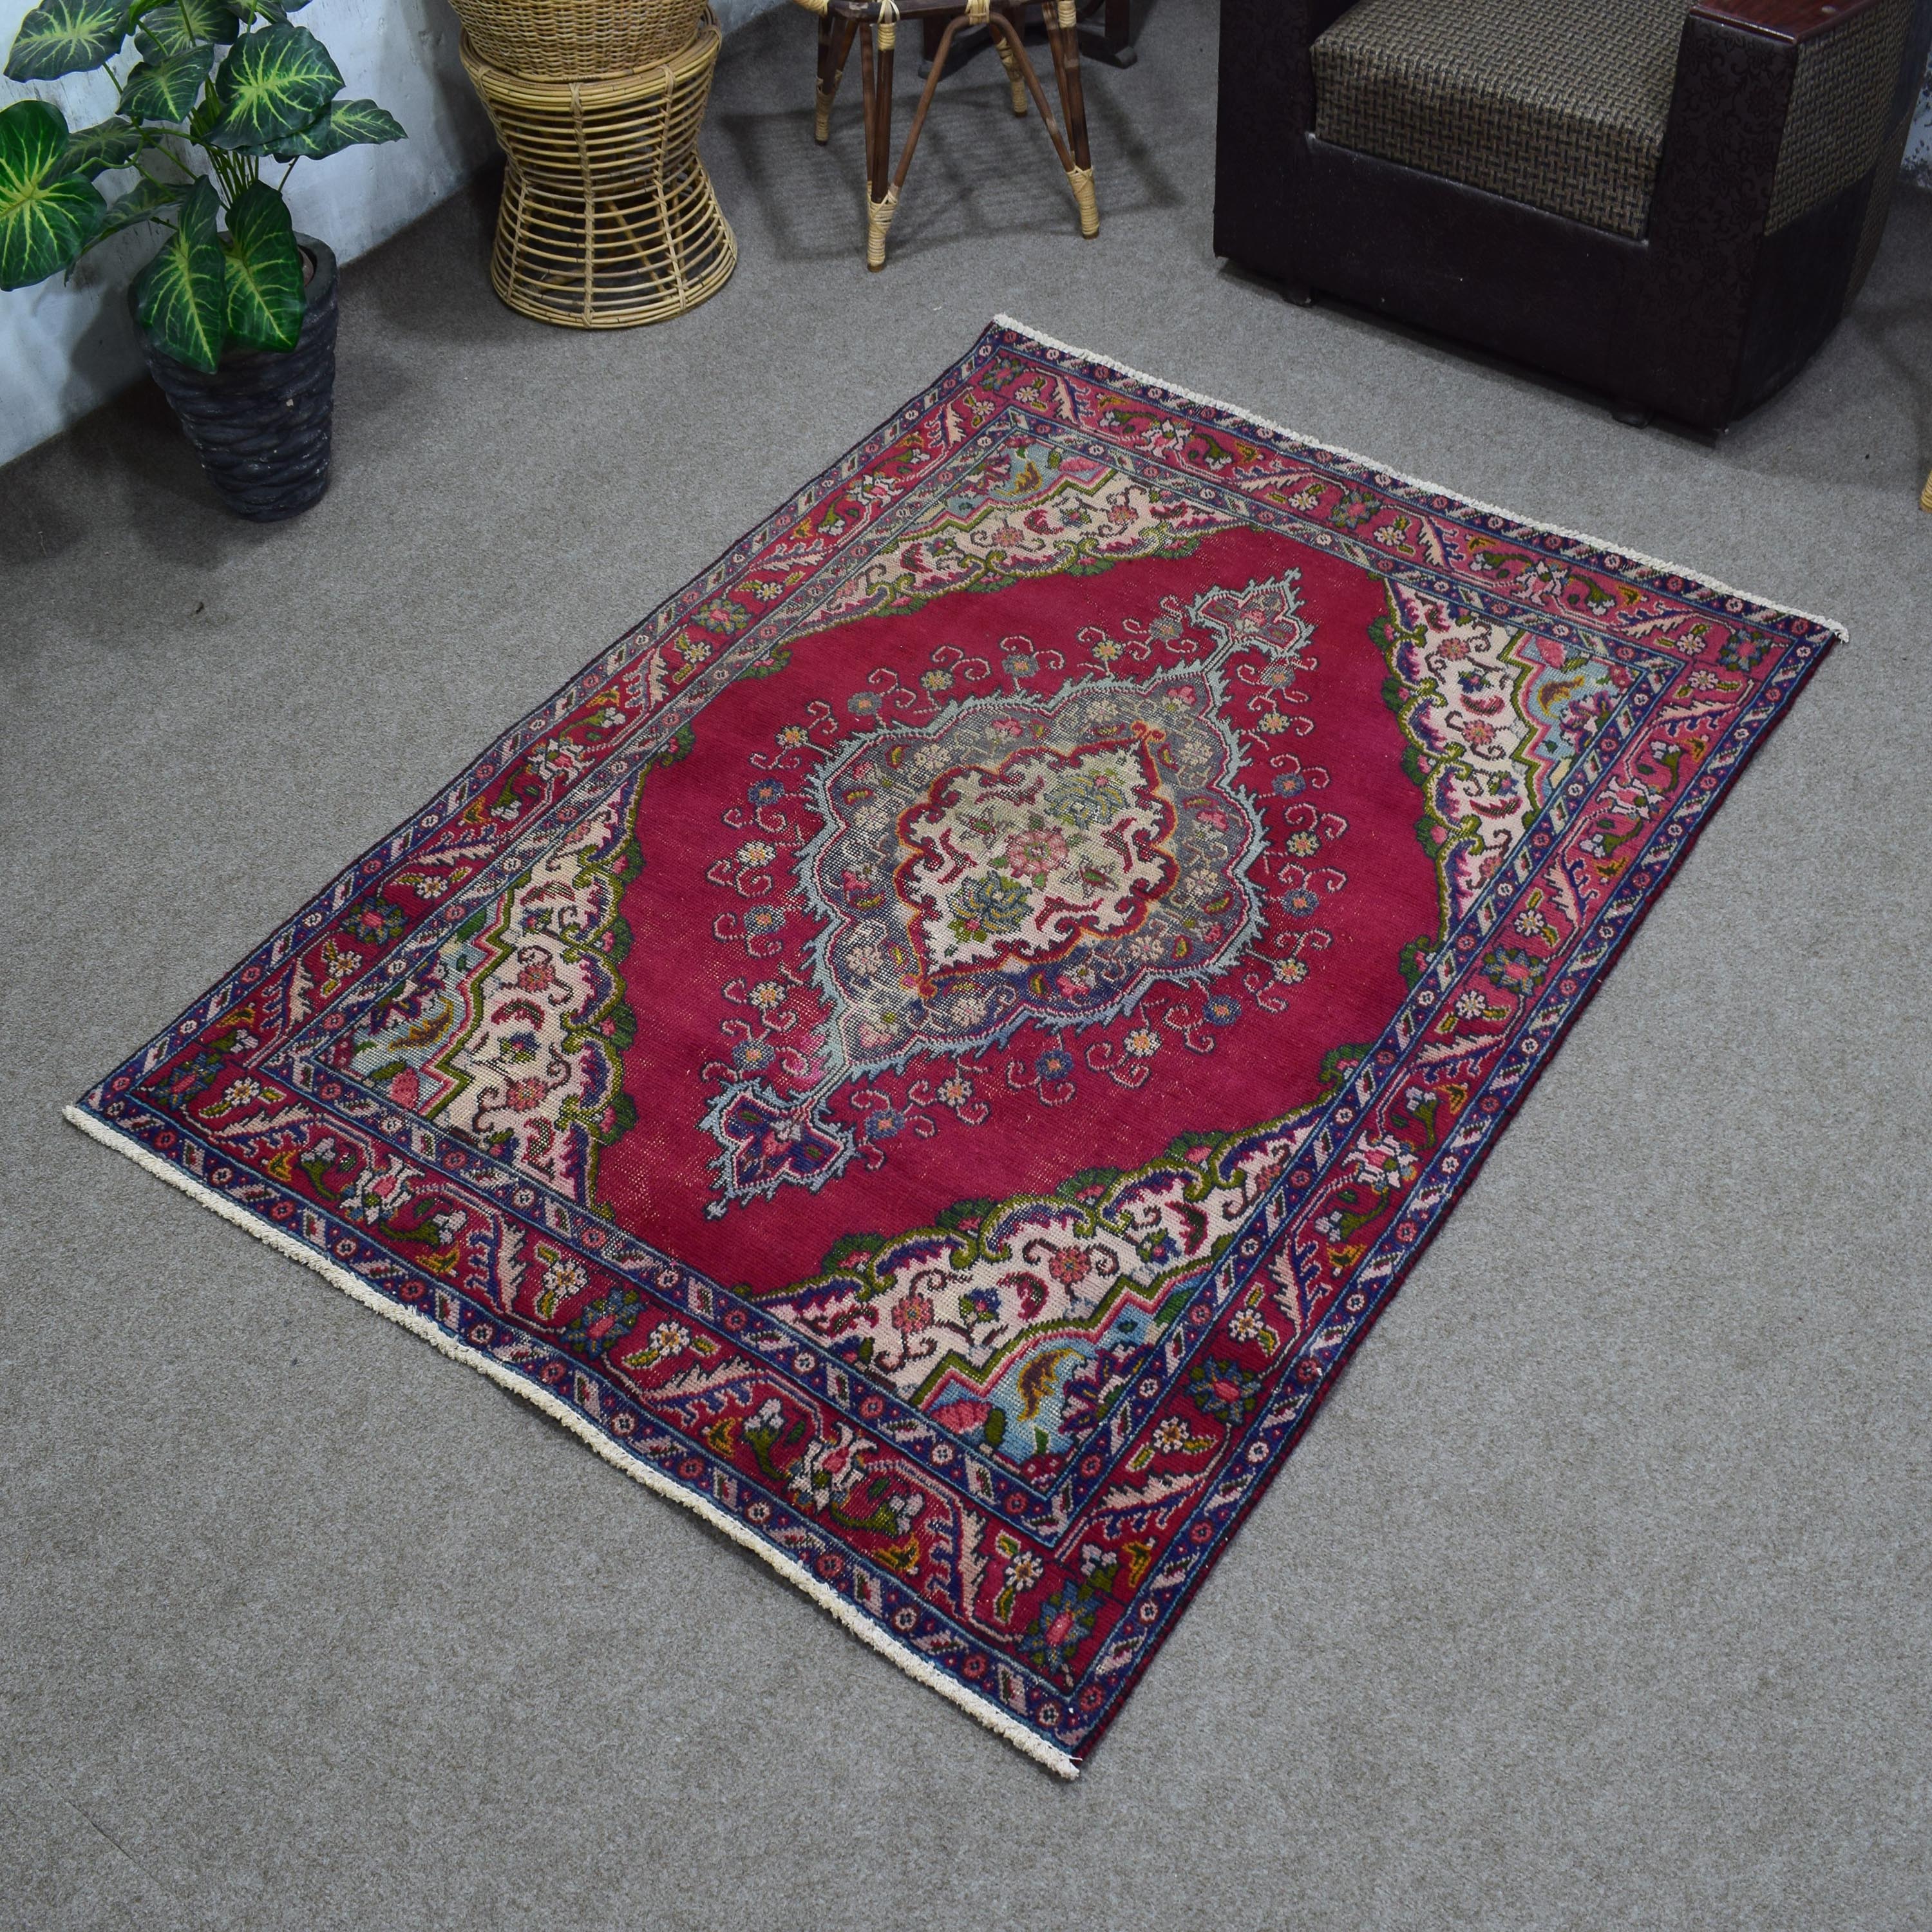 Hand Knotted Vintage Persian Shiraz Rug, 137 x 187 cm – Nile Rugs